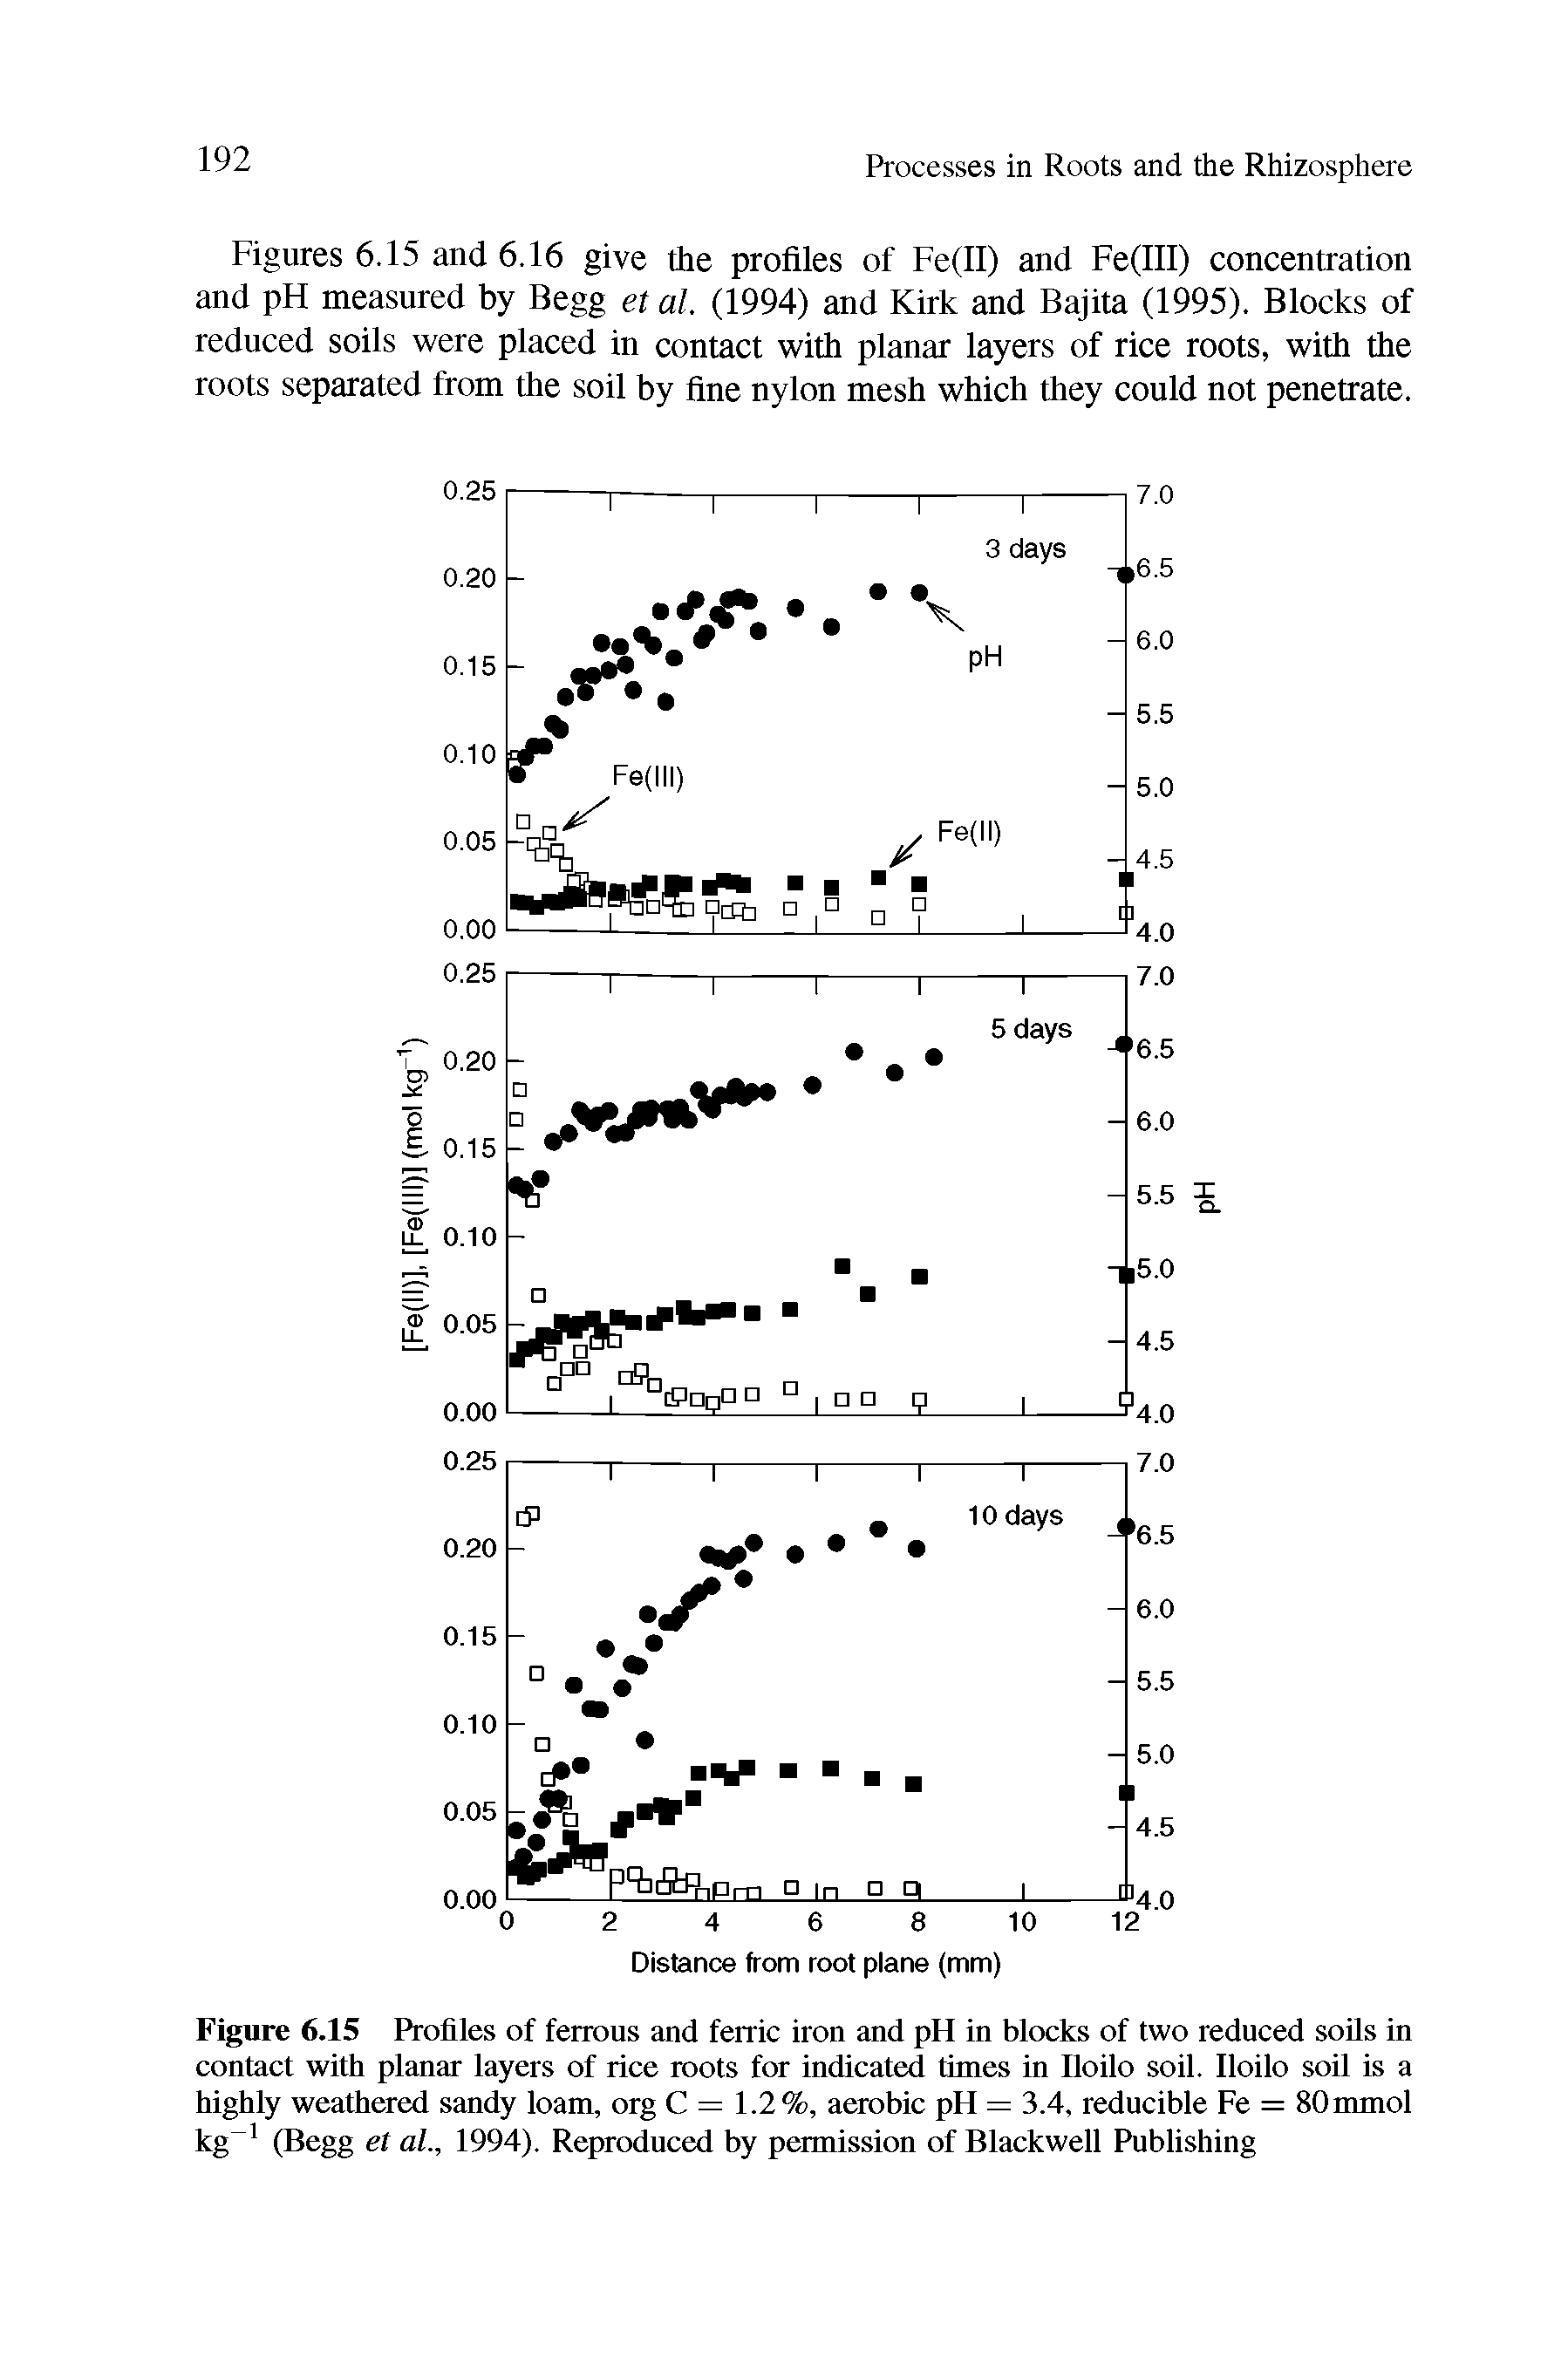 Figures 6.15 and 6.16 give the profiles of Fe(II) and Fe(III) concentration and pH measured by Begg et al. (1994) and Kirk and Bajita (1995). Blocks of reduced soils were placed in contact with planar layers of rice roots, with the roots separated from the soil by fine nylon mesh which they could not penetrate.